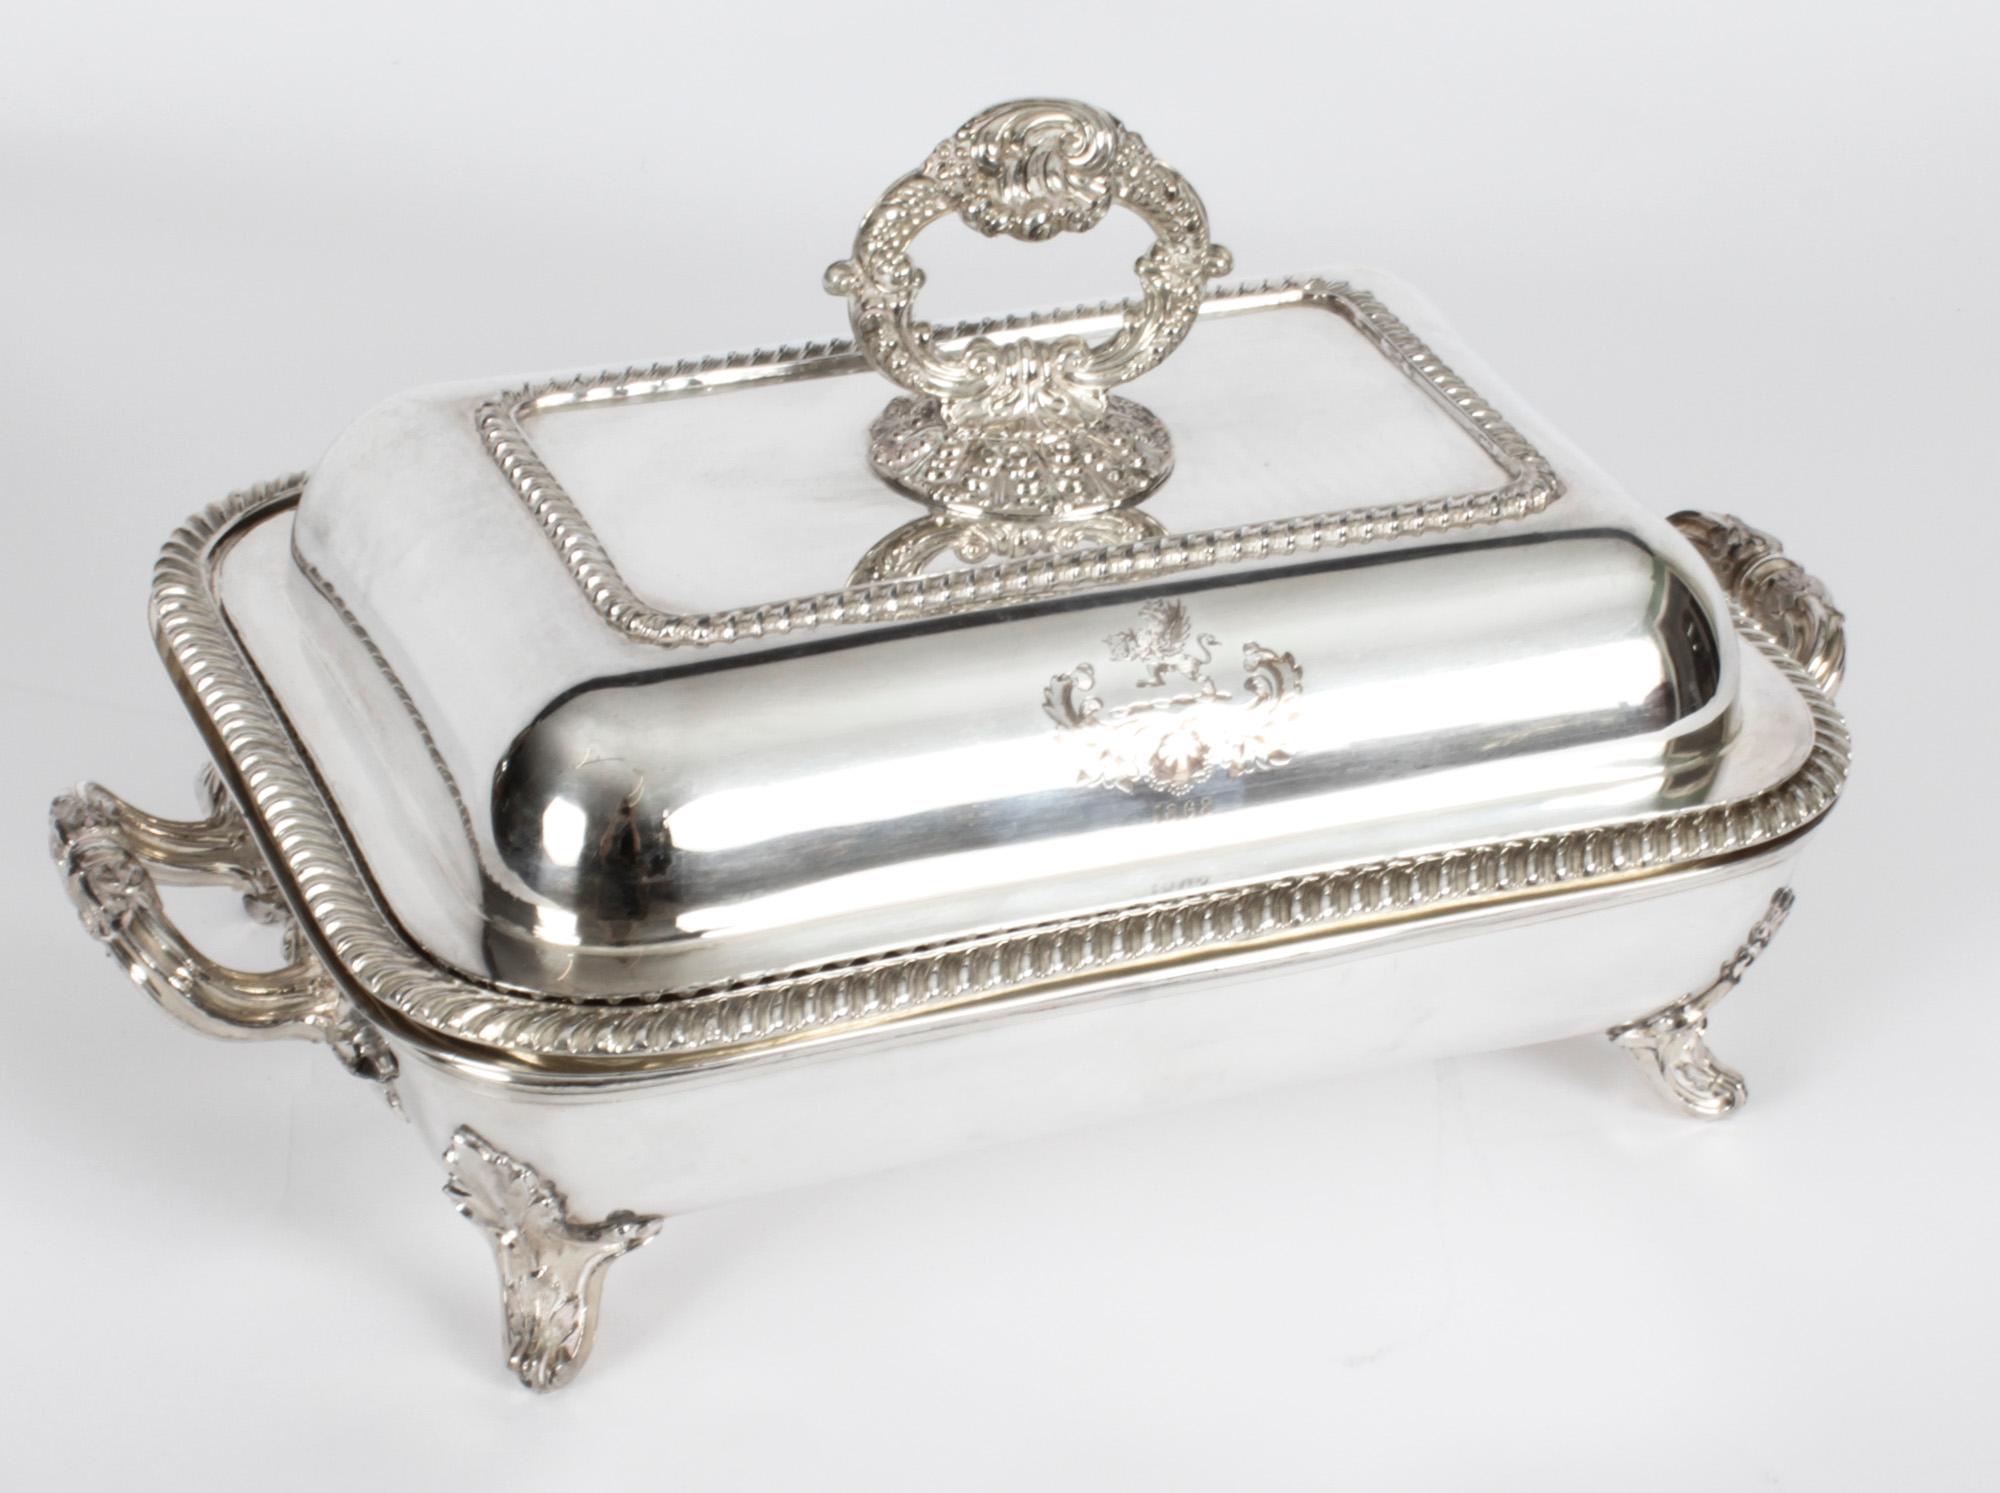 This is an exquisitely high-quality antique pair of English silver plated on copper entree dishes, each with an engraved crest, dated 1868.

These stunning rectangular entree dishes feature impressive gadrooned borders and foliate cast handles,